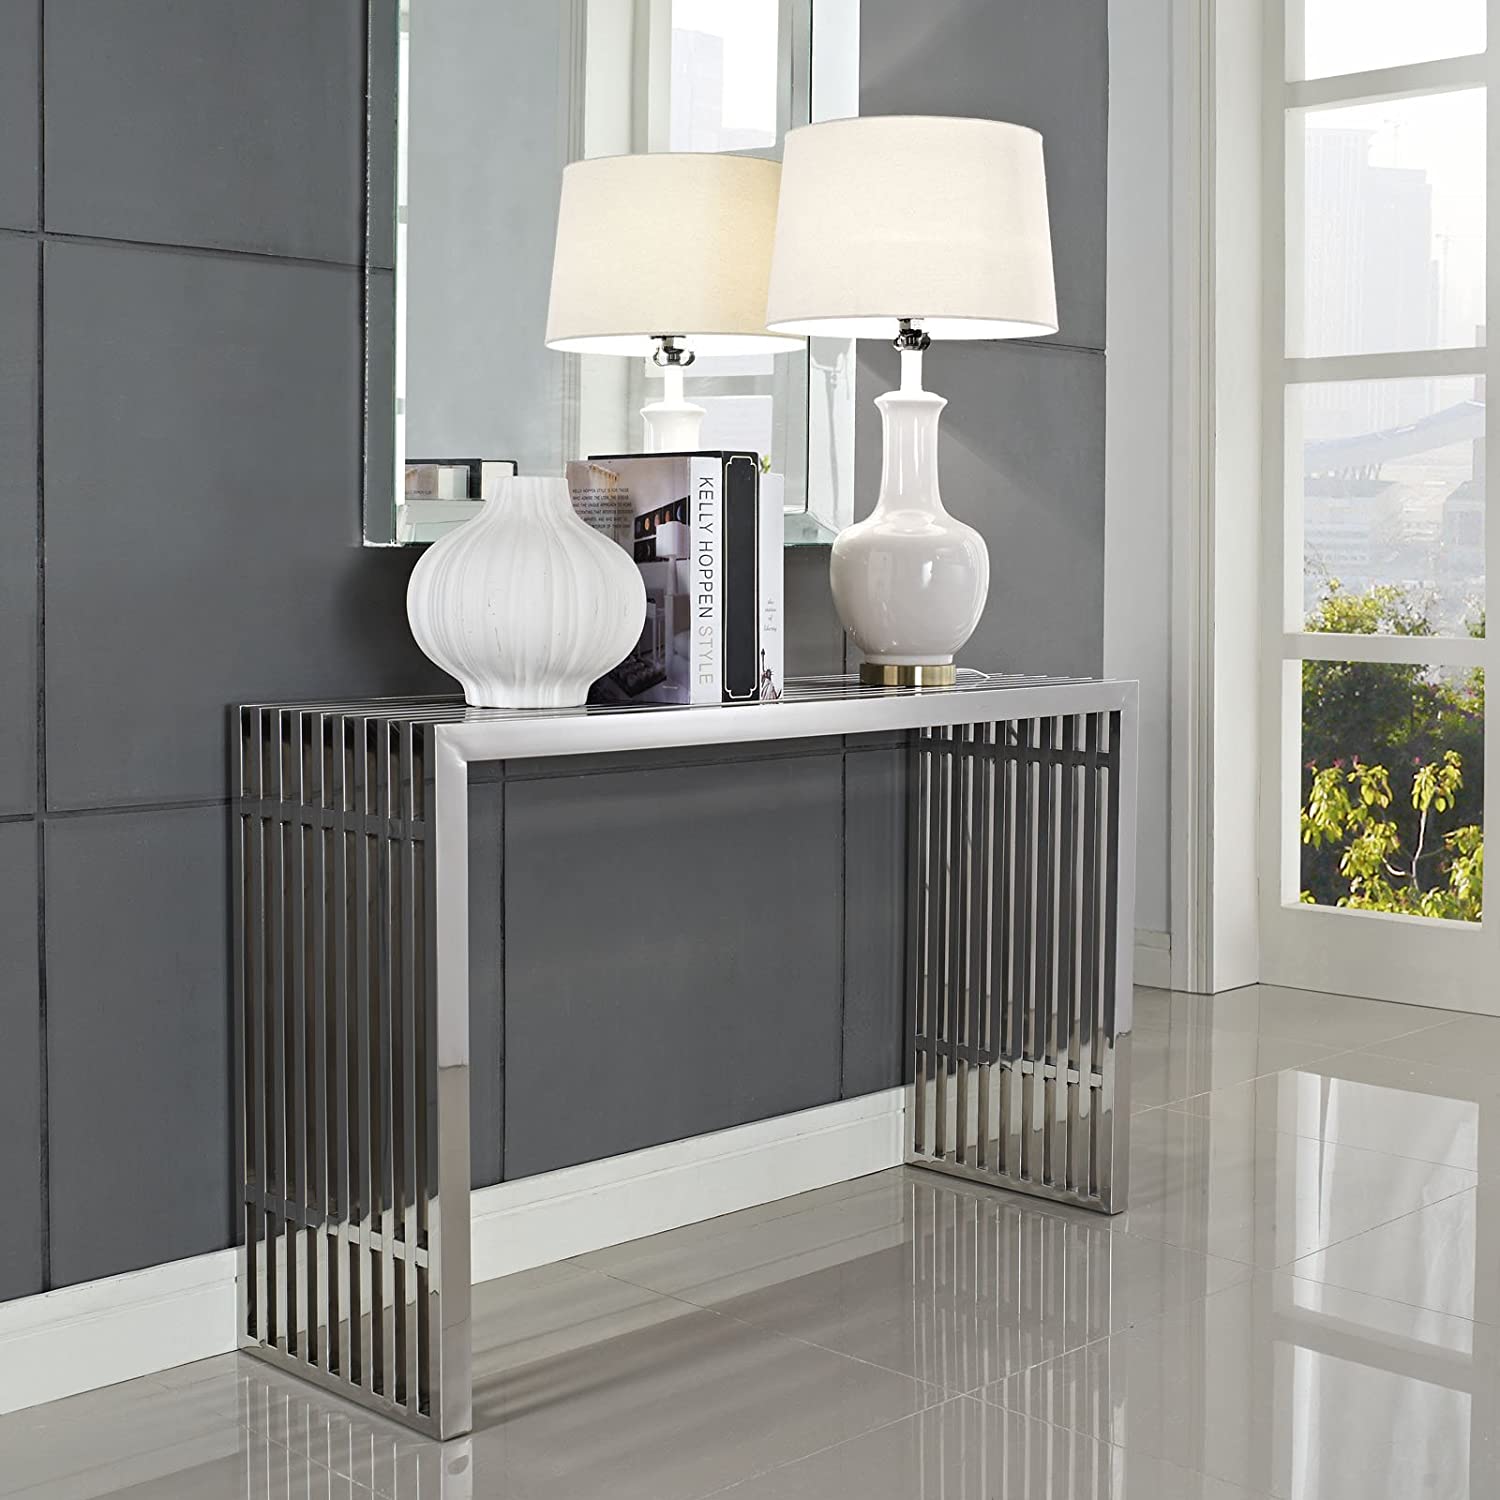 Modway Gridiron Contemporary Modern Stainless Steel Console Table, Silver